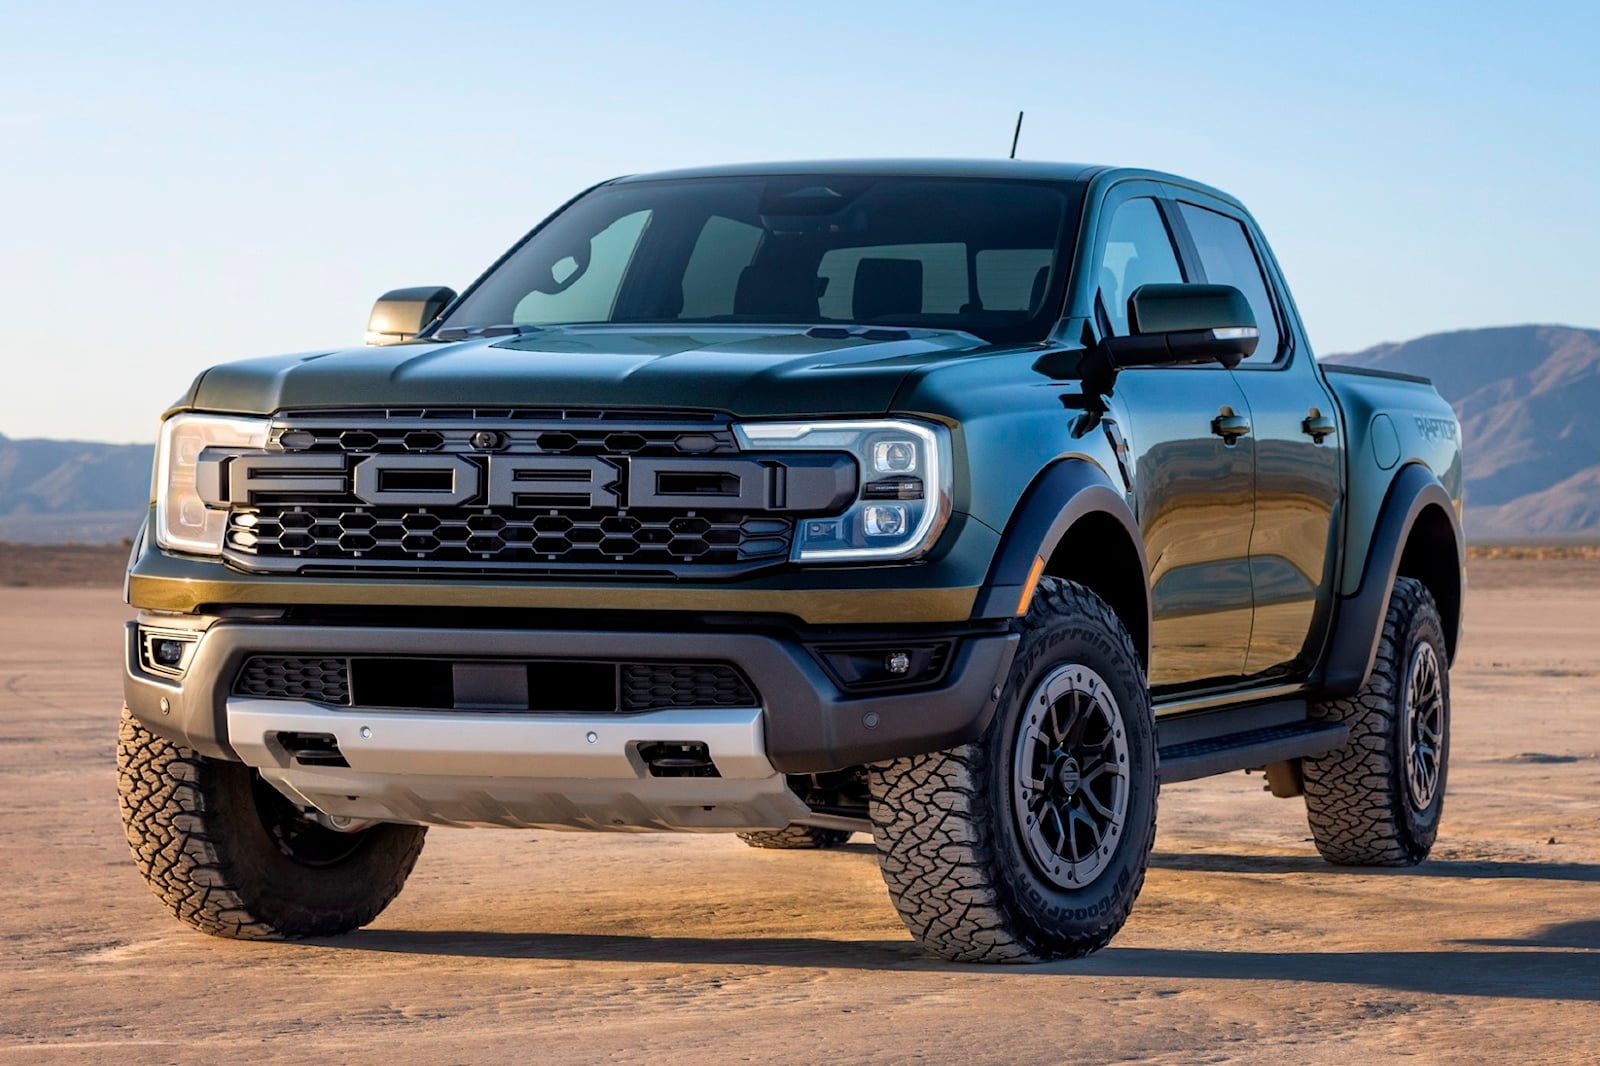 The All-New 2024 Ford Ranger Raptor is Ready to Dominate in the